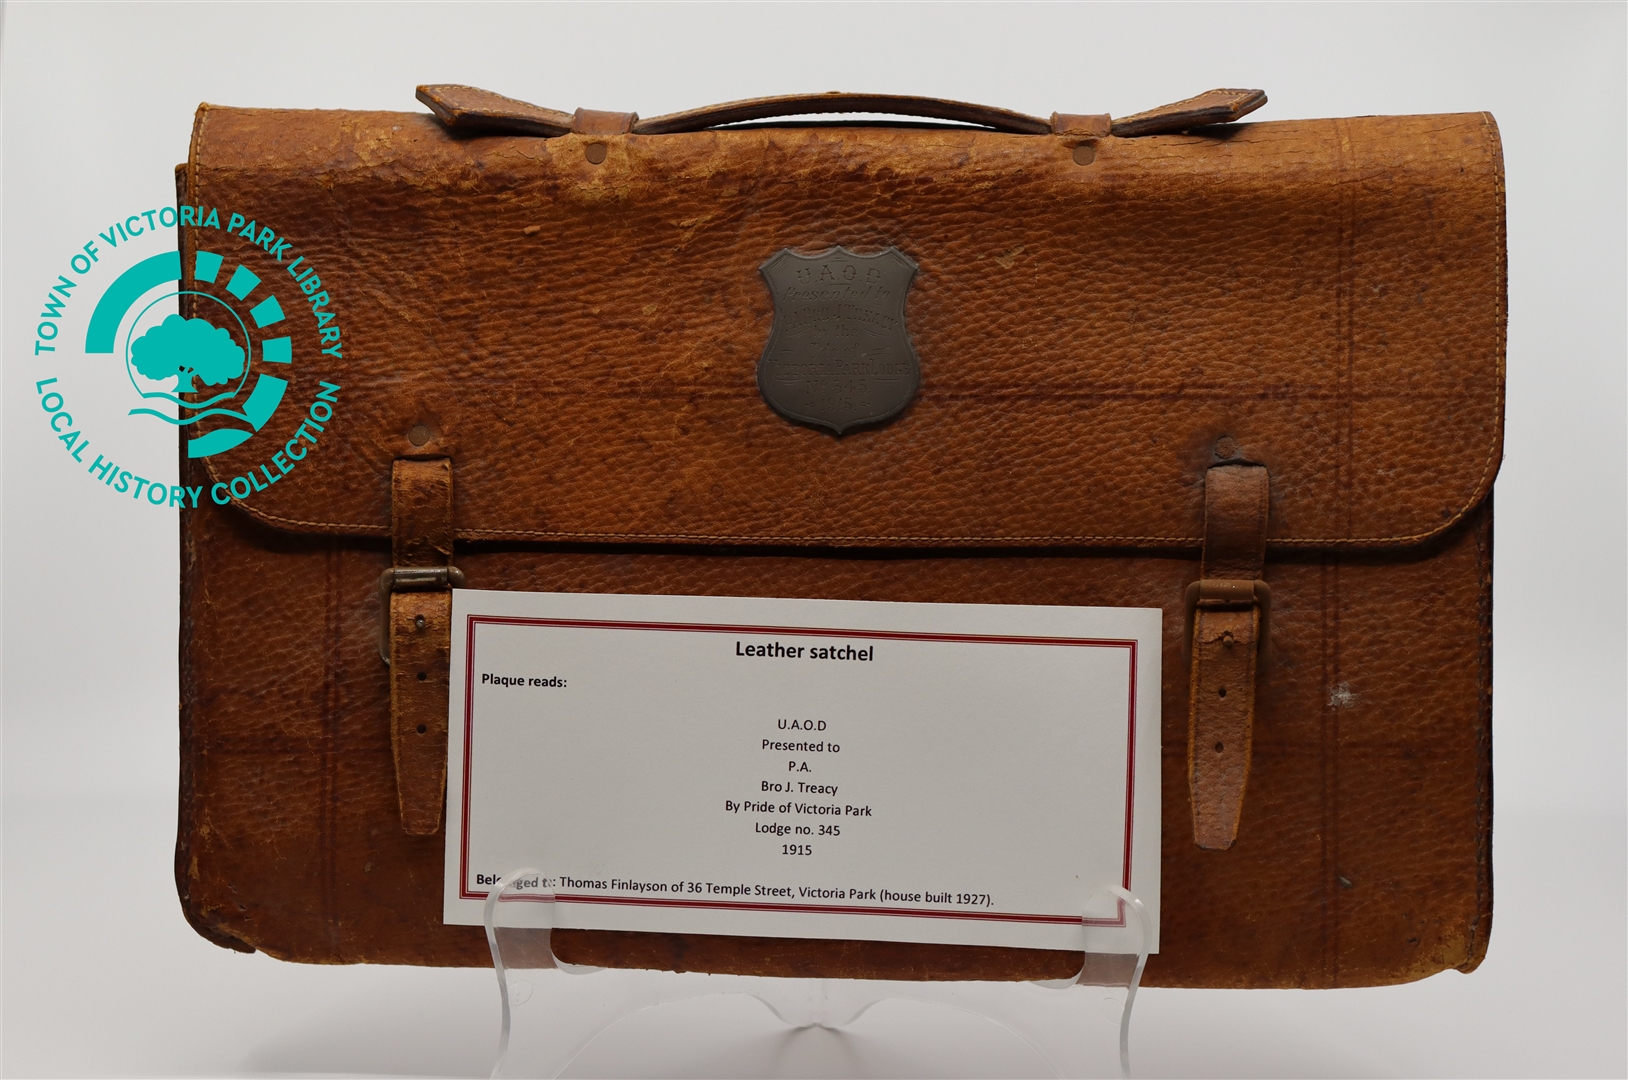 Front view of Mr J. Treacy's leather satchel with display note Image